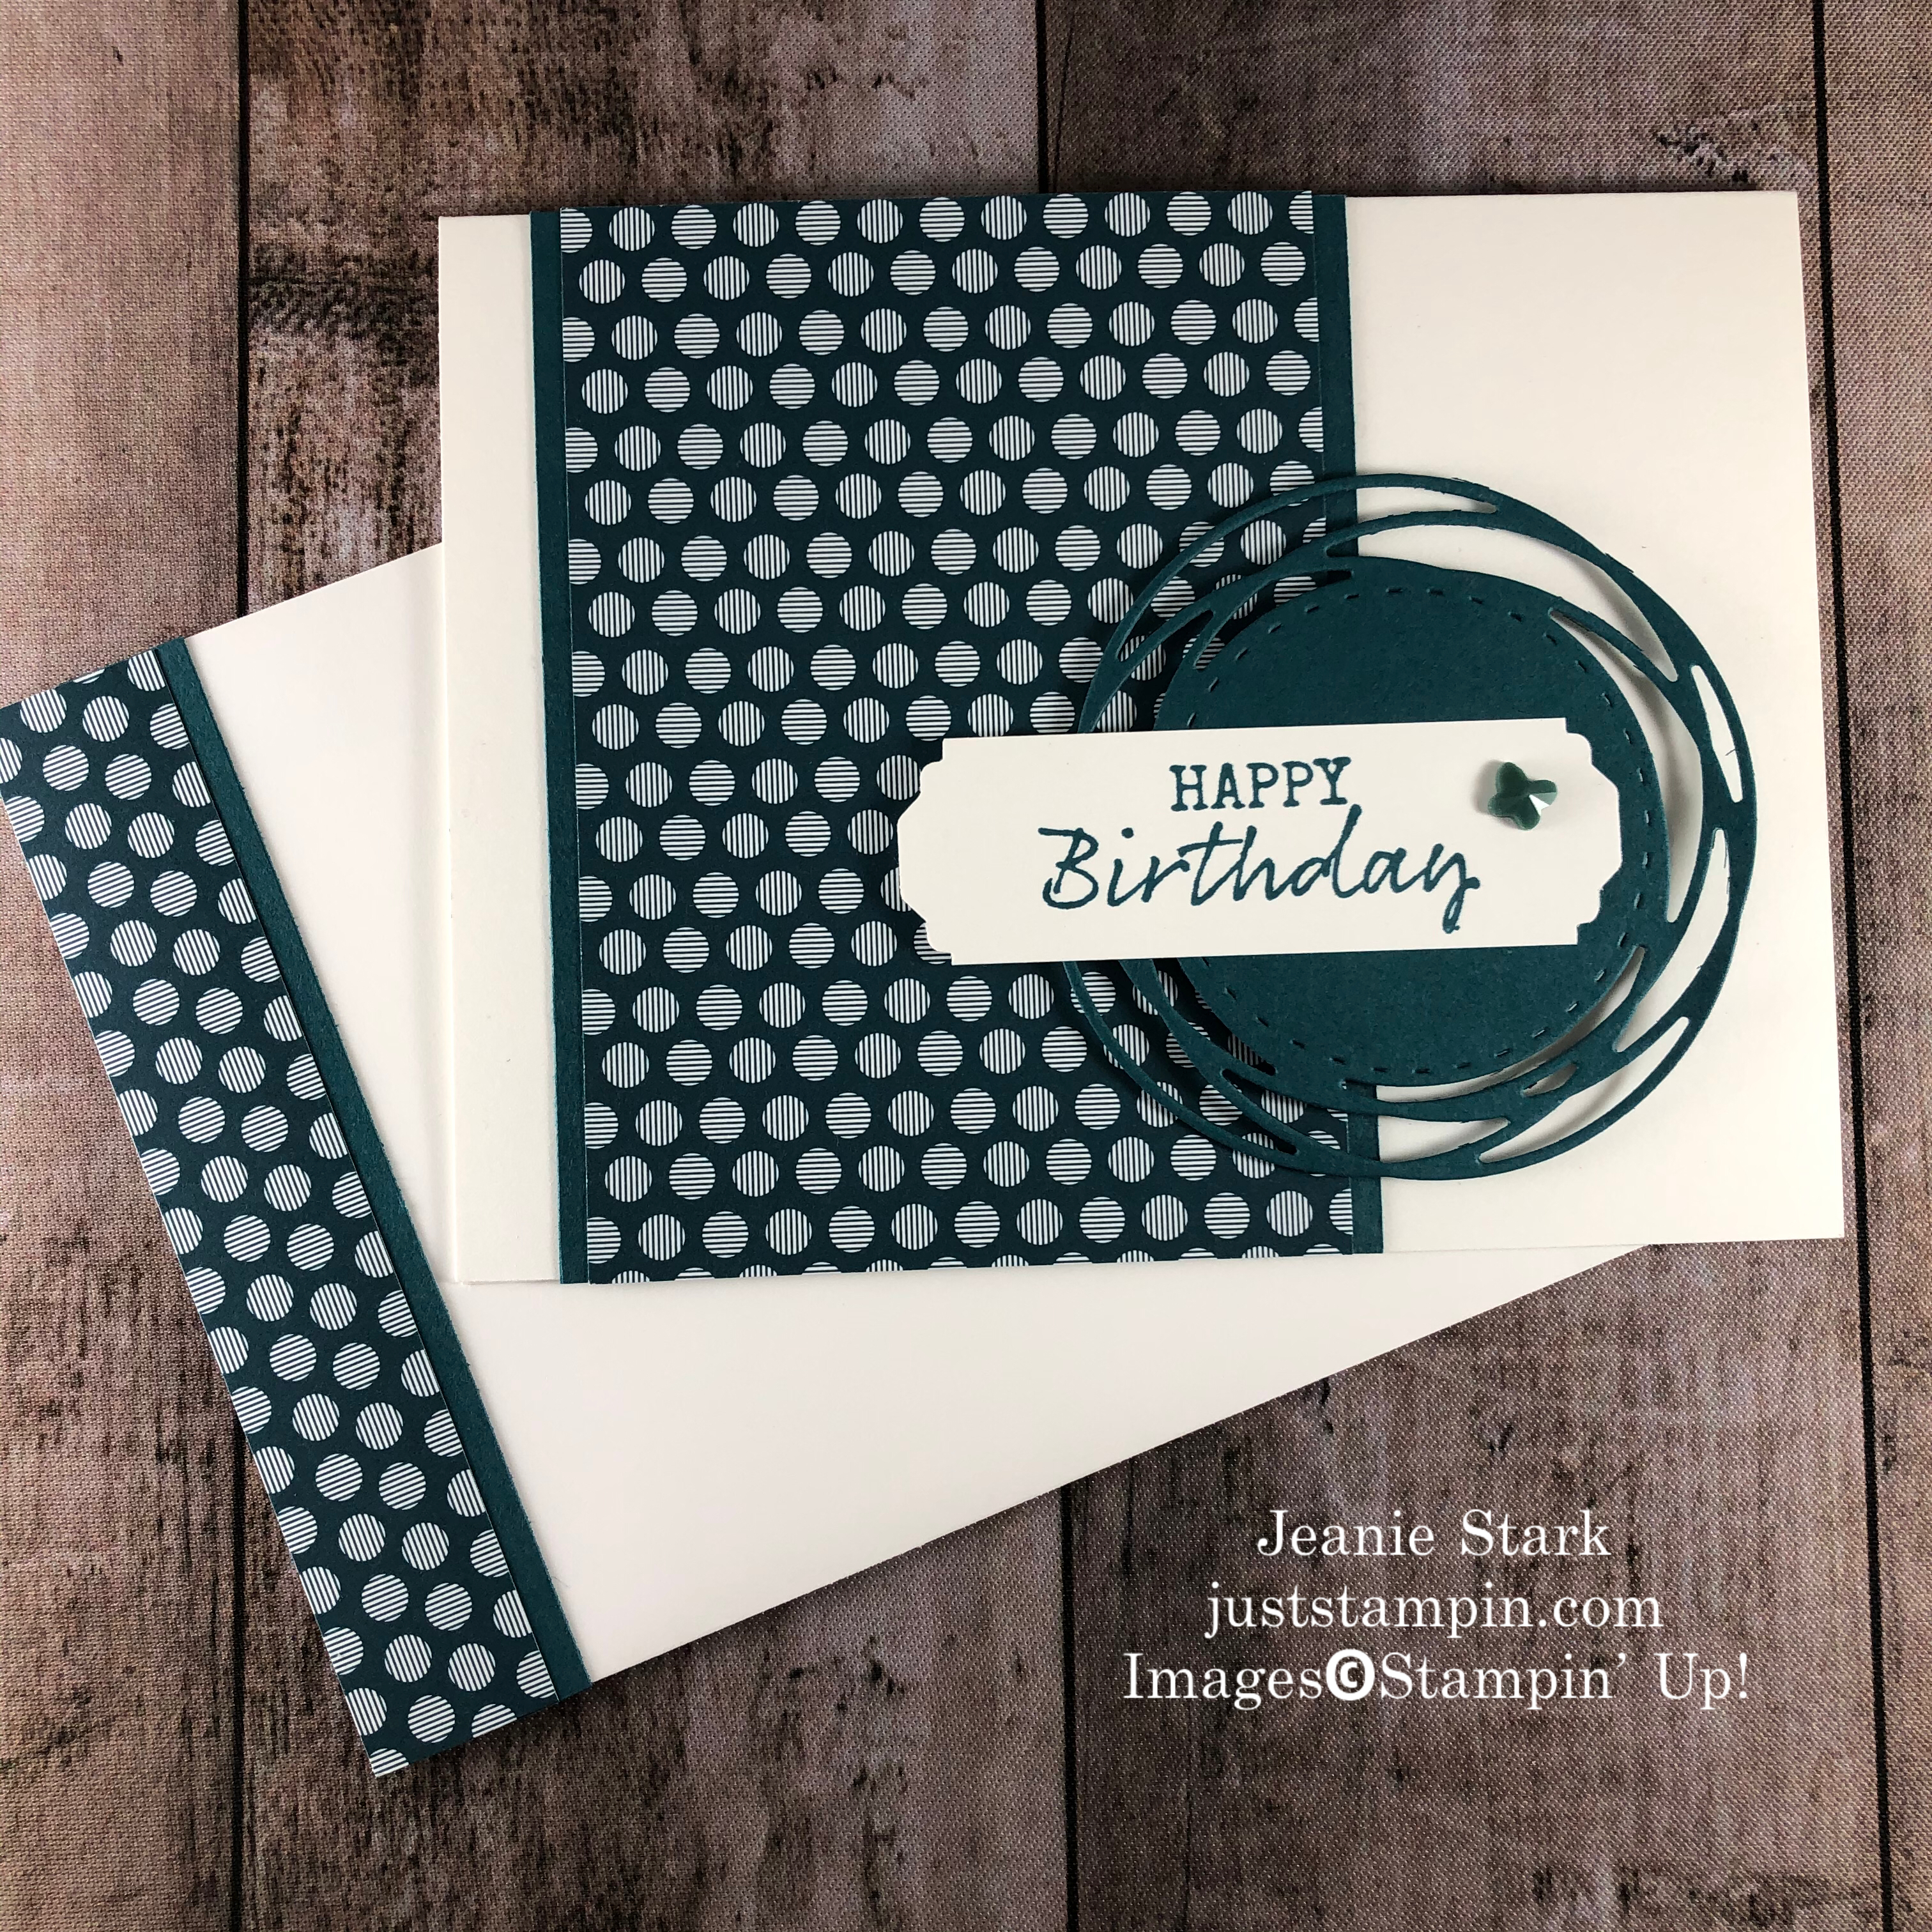 Stampin' Up! 2019 - 2021 In Color Painted Poppies birthday card idea with Seaside Notions - Jeanie Stark StampinUp